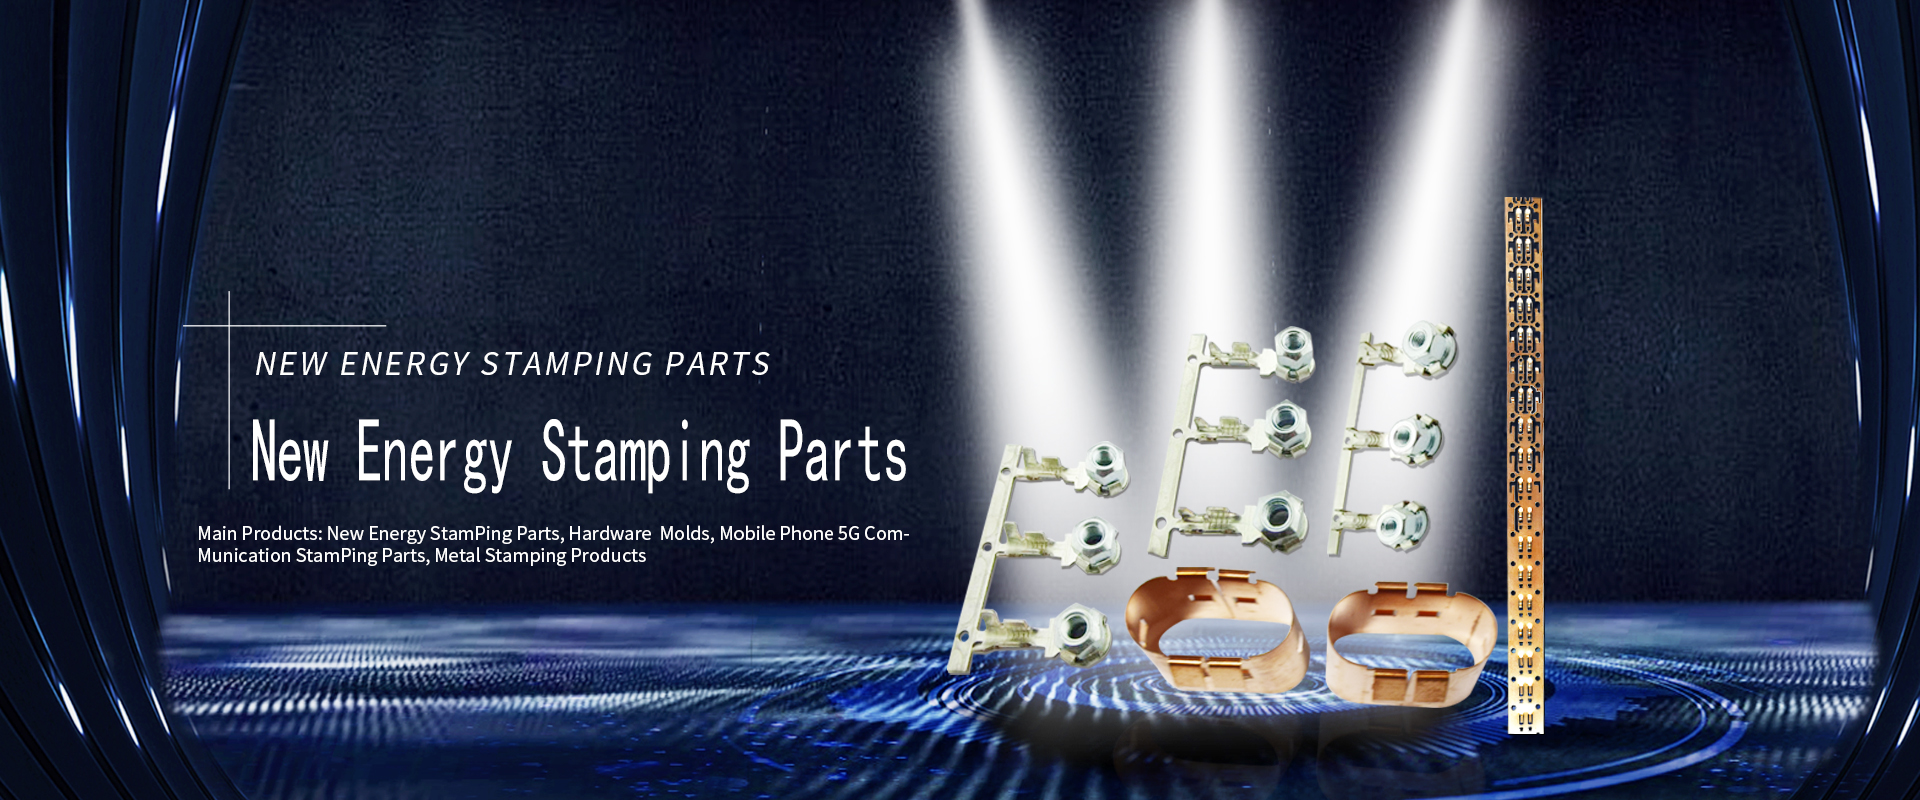 Precision stamping parts, new energy stamping parts, metal stamping dies